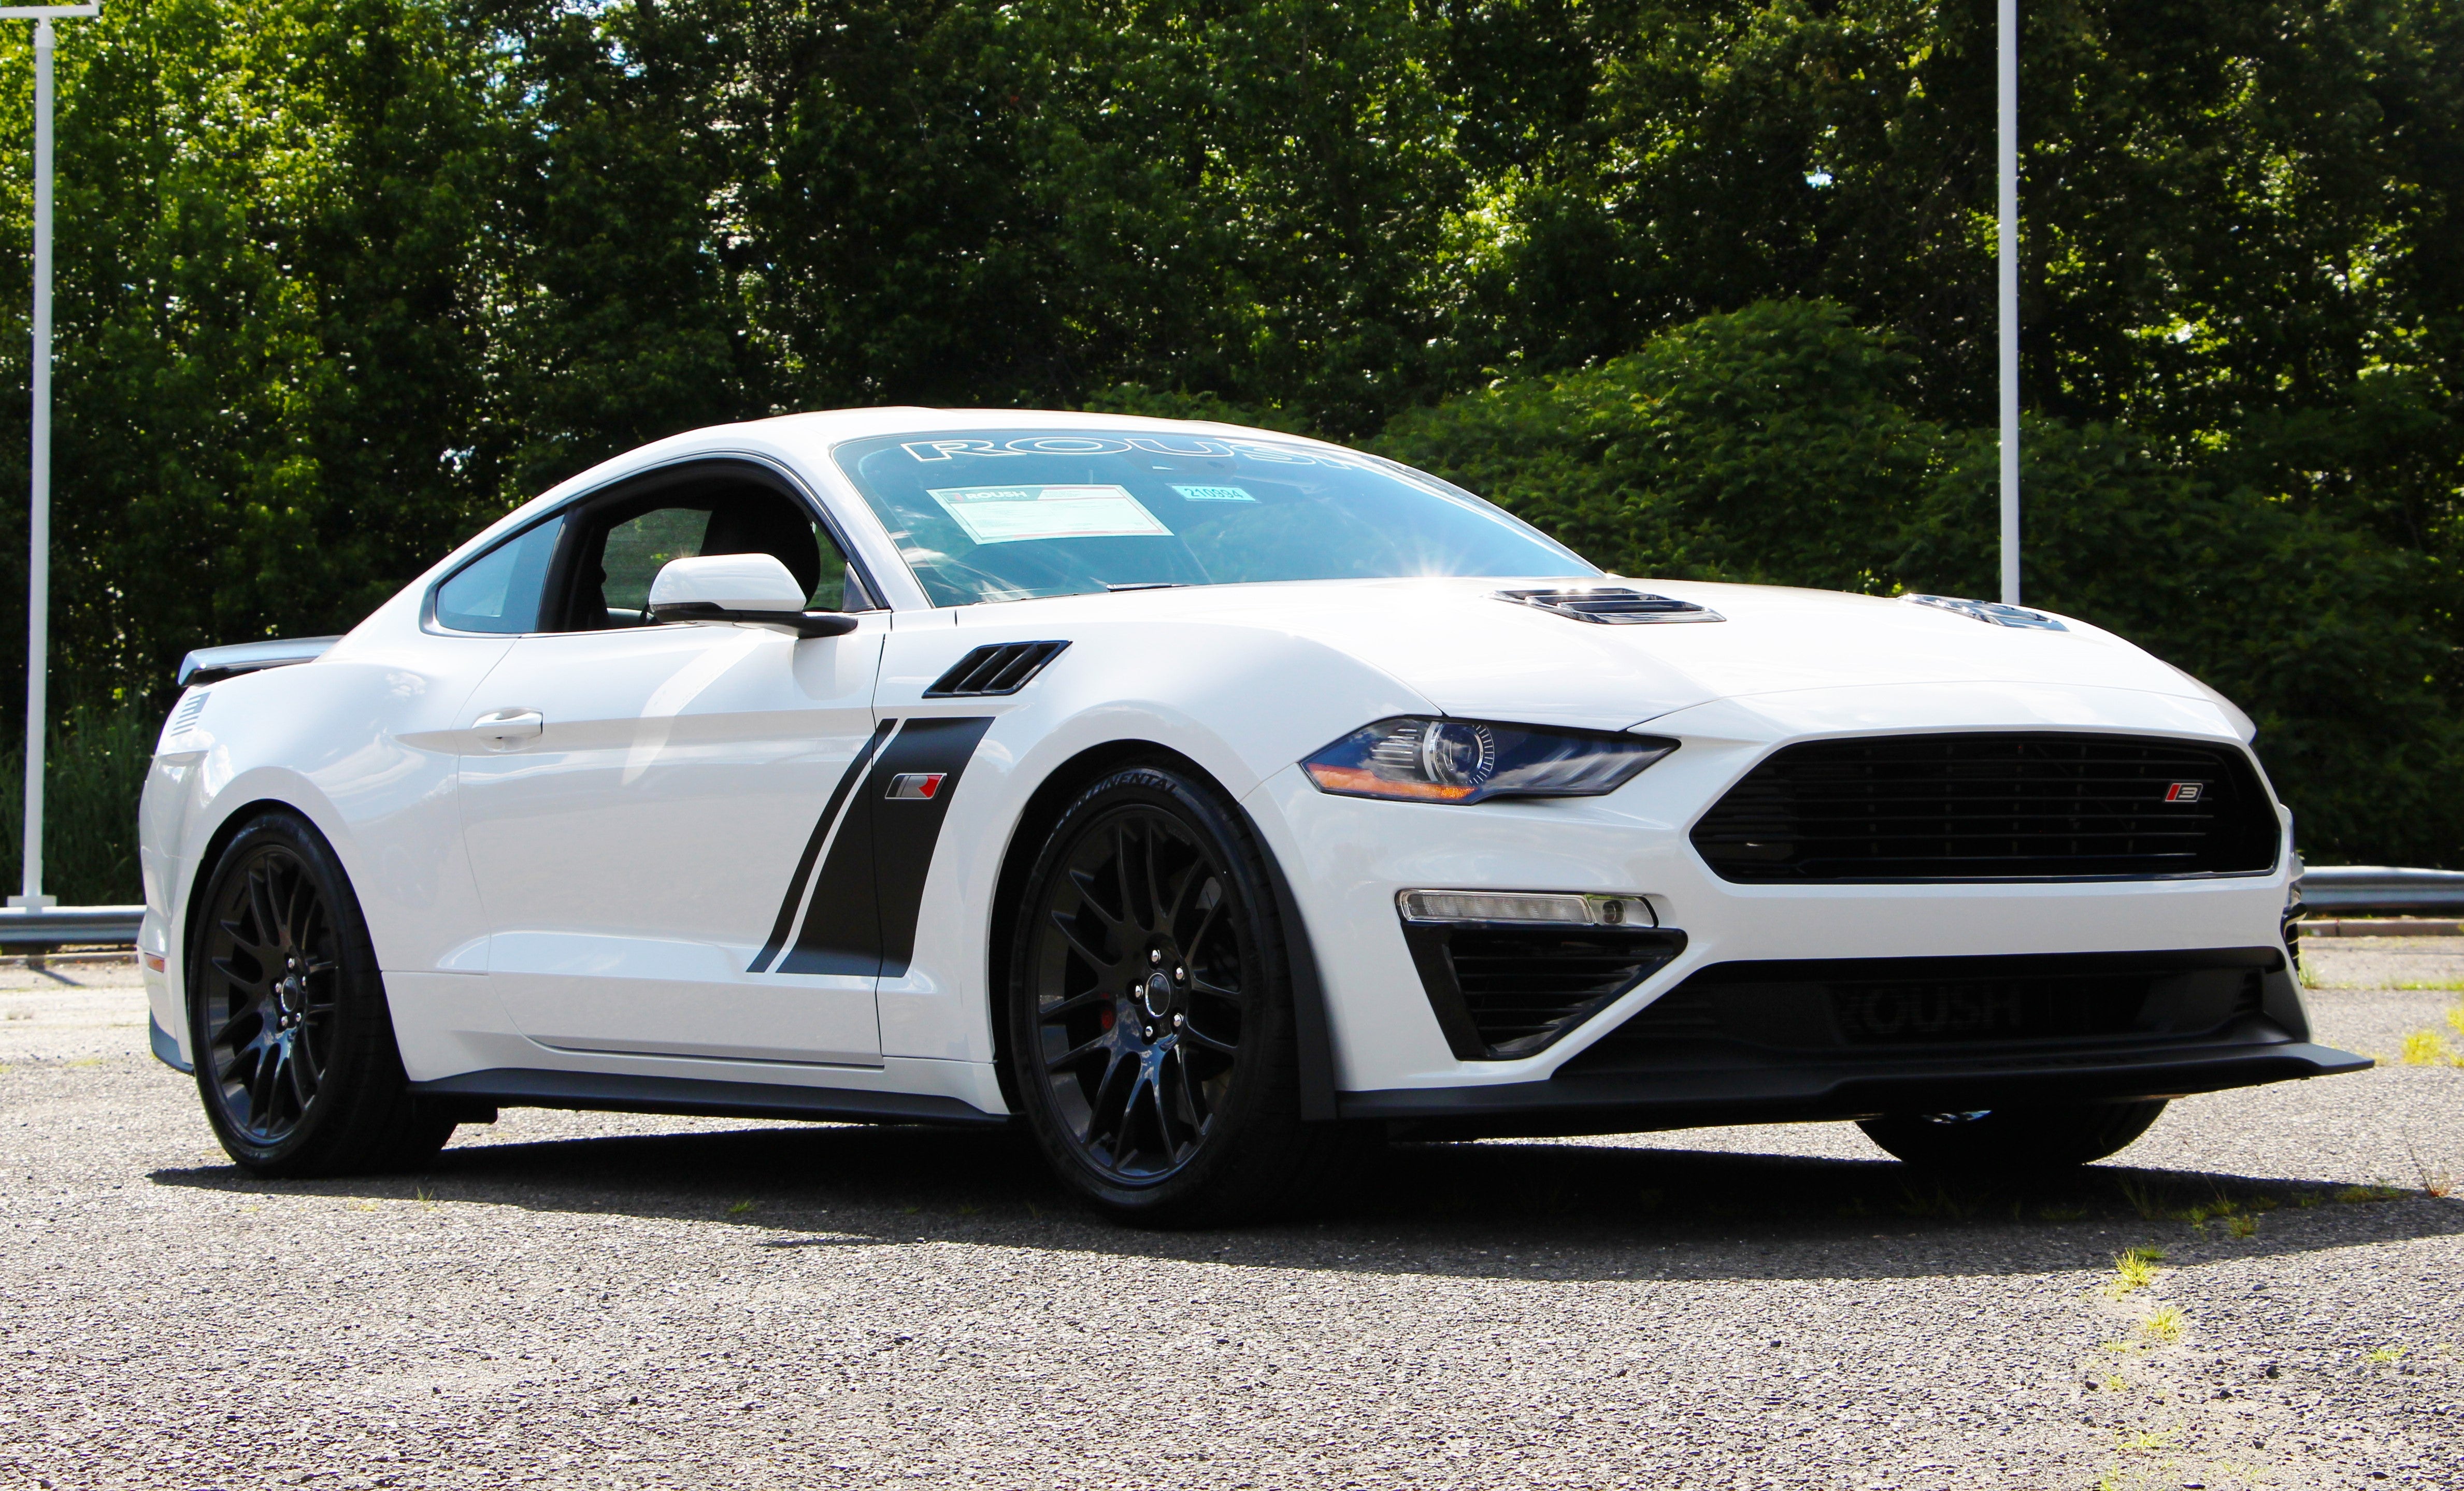 ROUSH White Mustang at All American Ford of Paramus in Paramus NJ